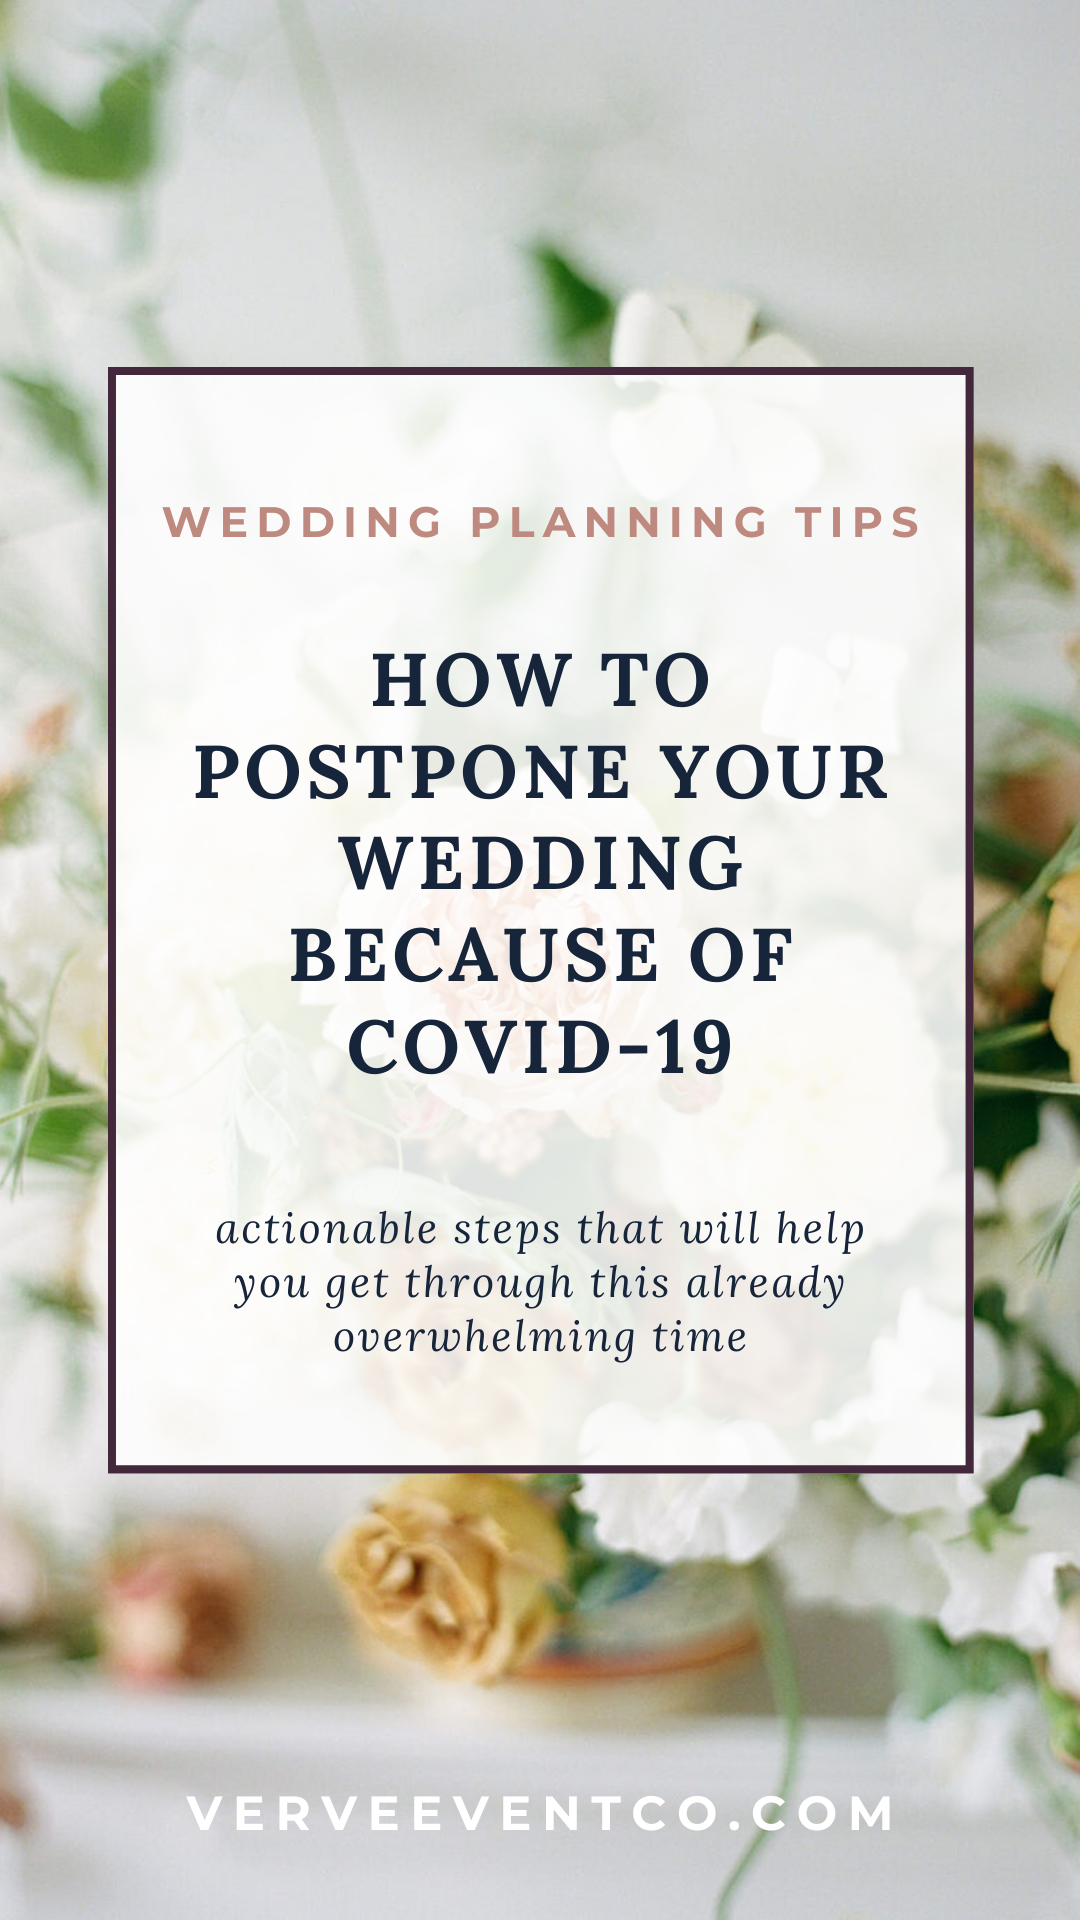 How to Postpone Your Wedding Because of COVID-19